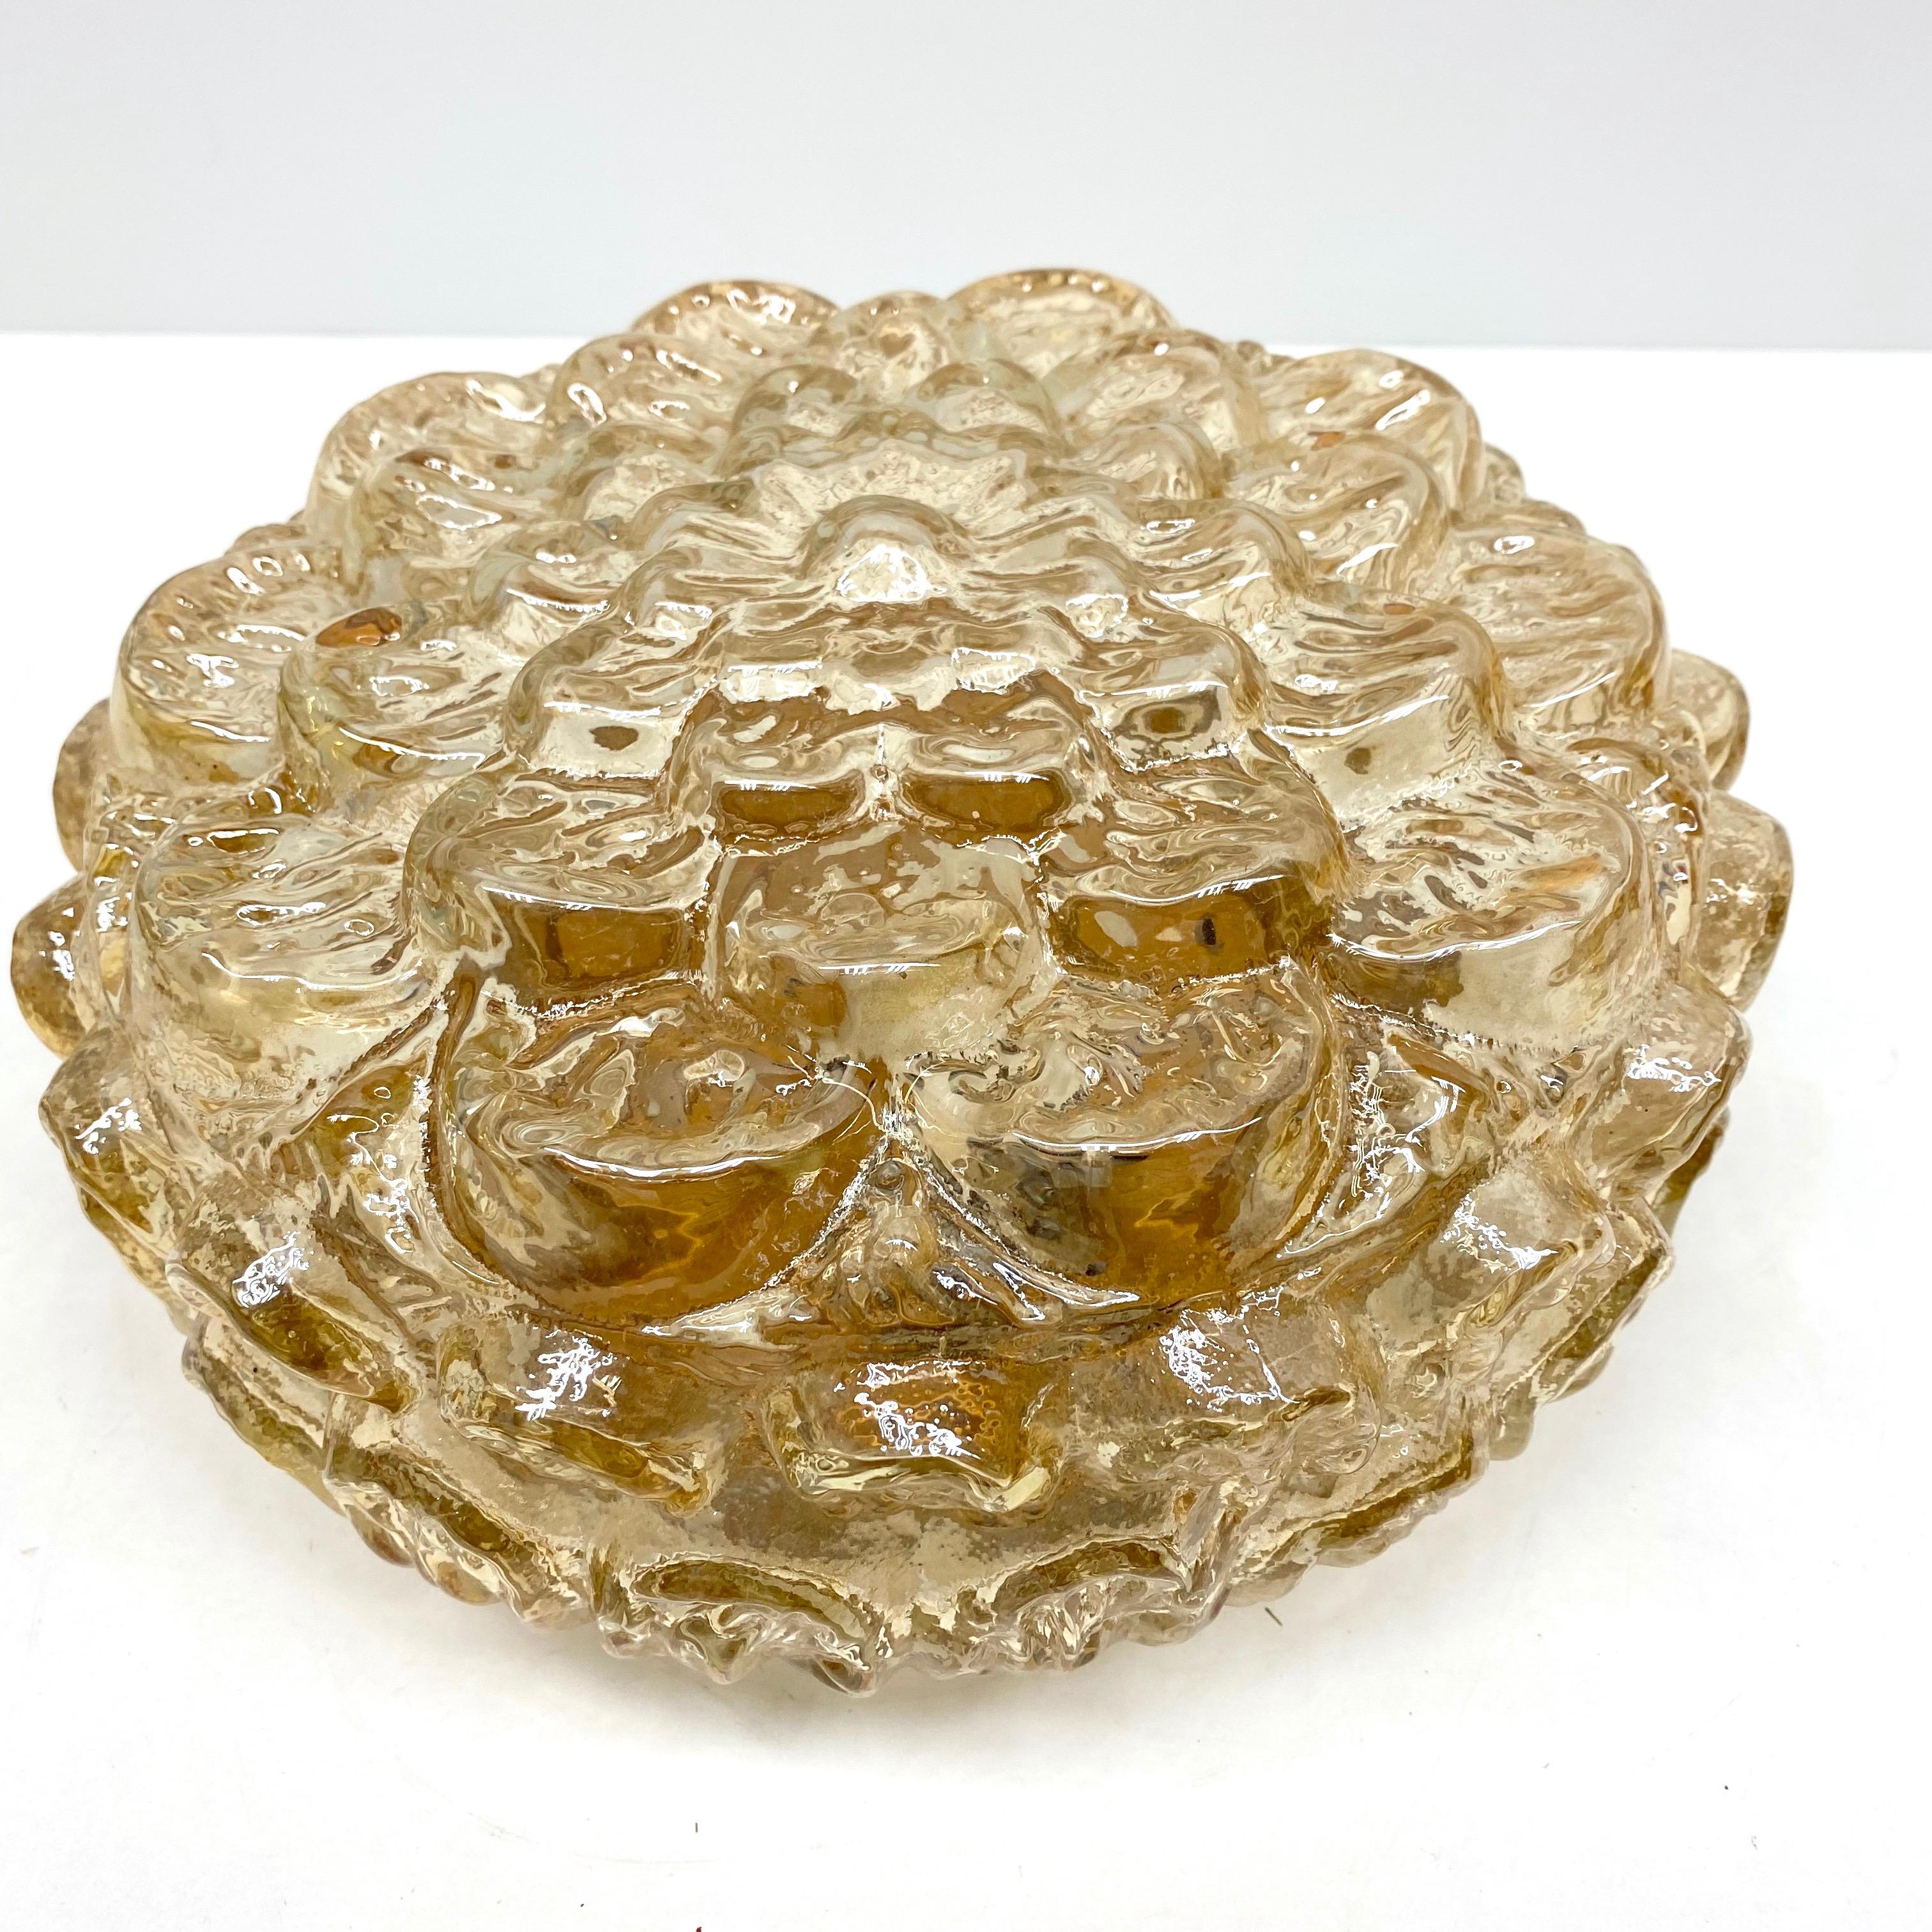 Large flower pattern amber glass flush mount. Made in Germany by RZB Leuchten. Gorgeous textured glass flush mount with metal fixture. The Fixture requires one European E27 / 110 Volt Edison bulb, up to 60 watts.